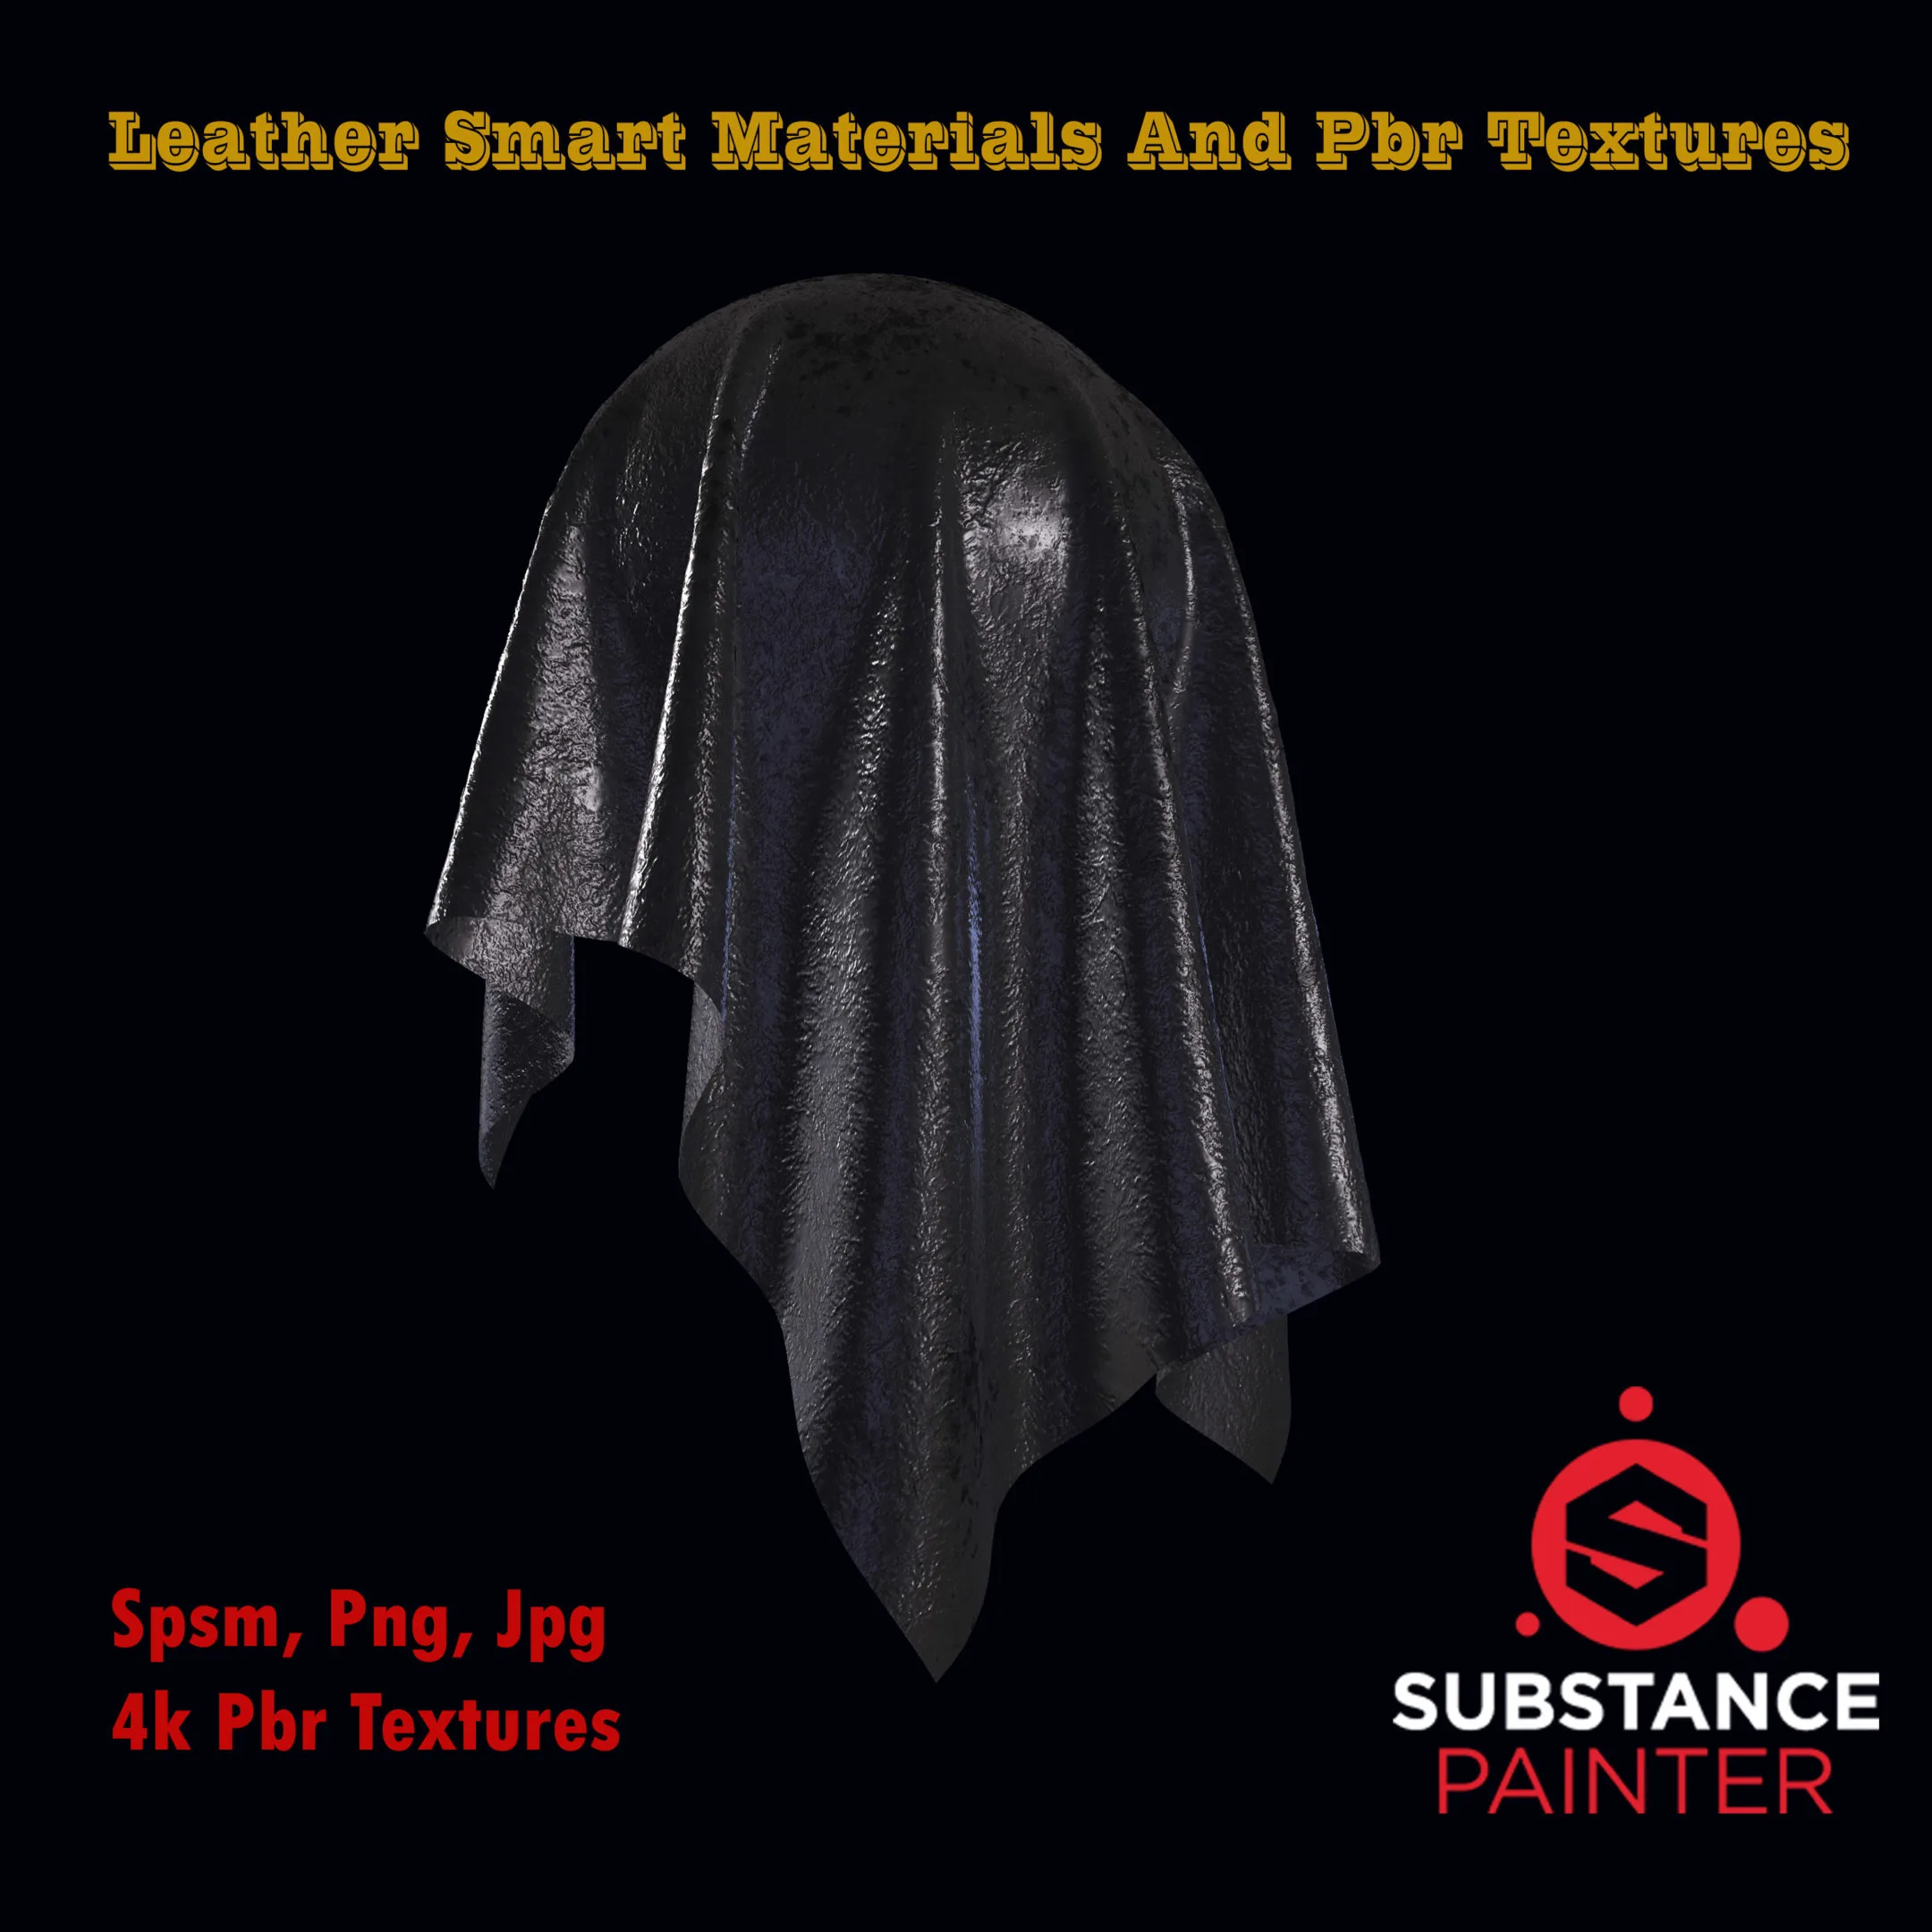 10 Leather Smart Materials and PBR Textures